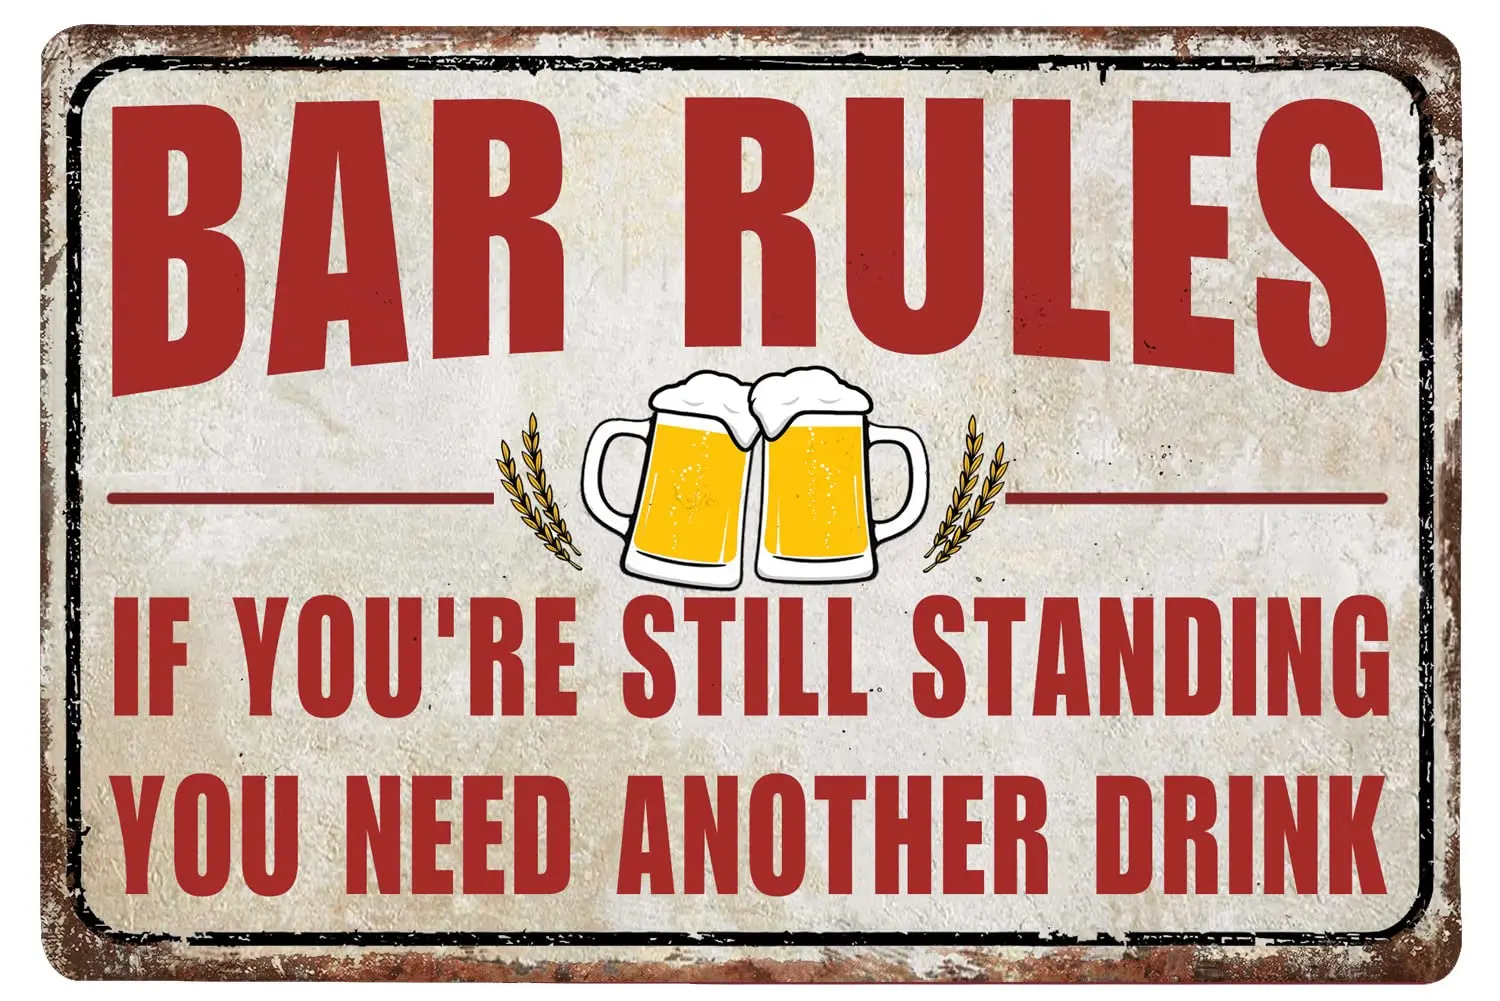 

Vintage Bar Rulels Tin Signs Cheers Metal Signs Wall Decor Accessories For Home Bar Man Cave Backyard Speakeasy 8"x12"